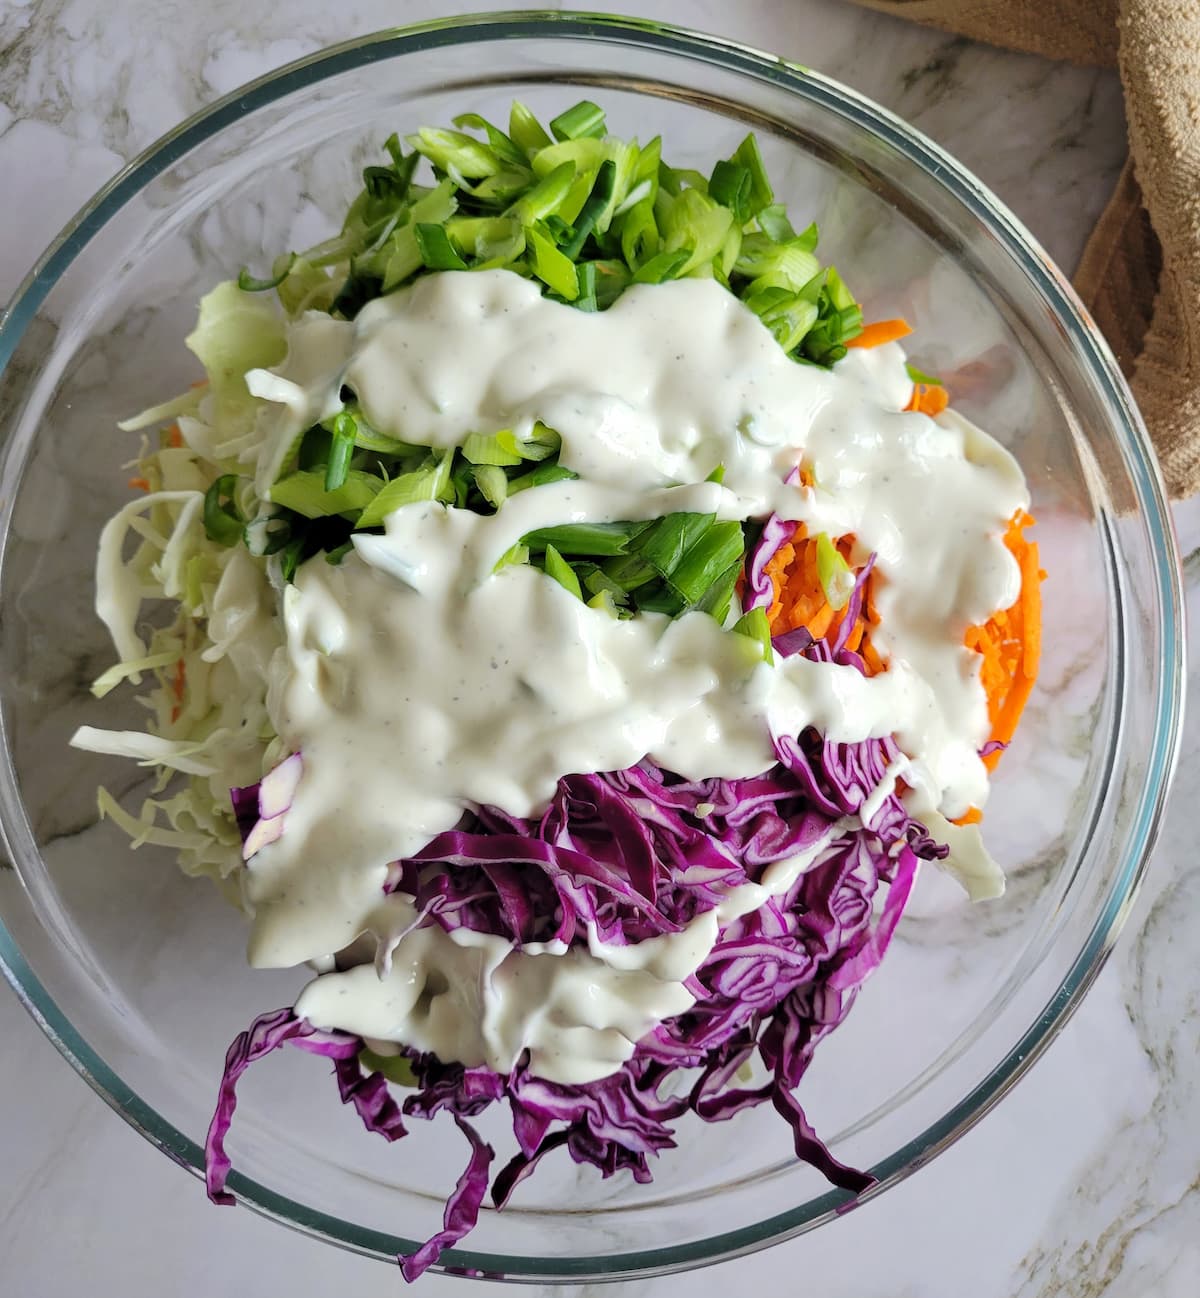 creamy dressing over a bowl of green onions, carrots, red and green cabbage